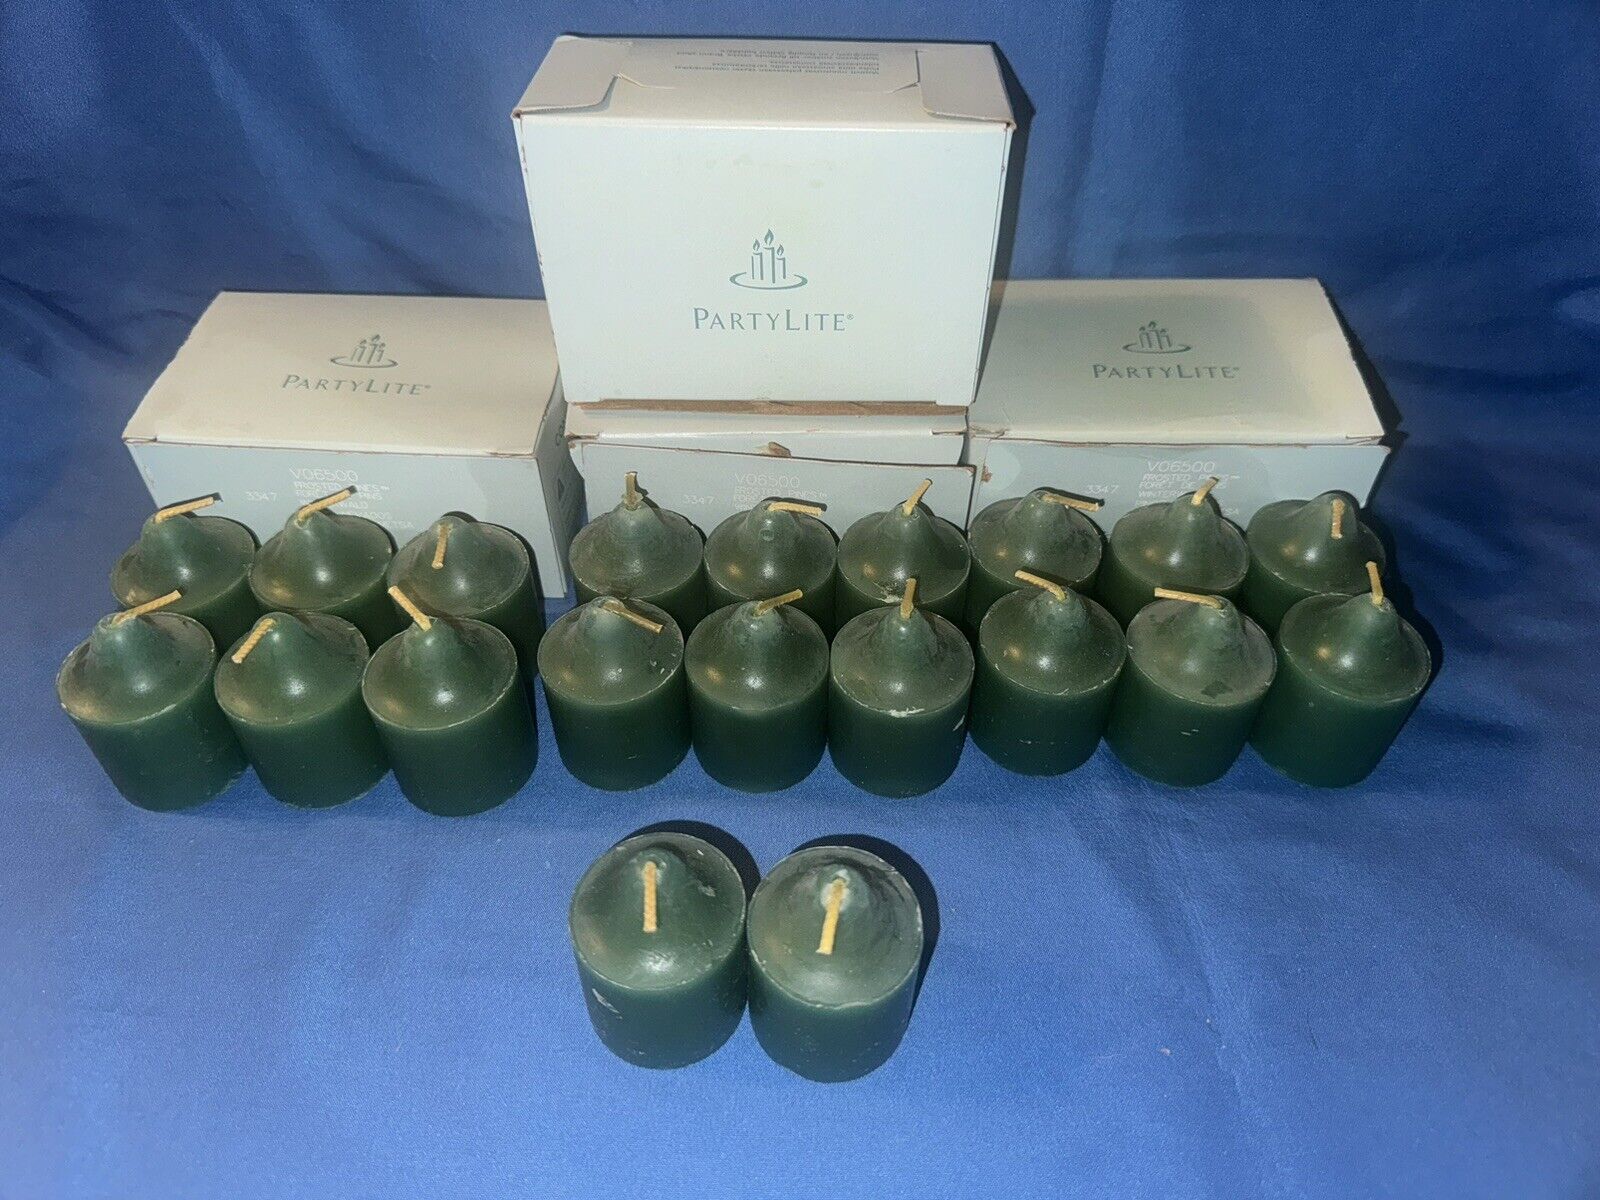 PartyLite FROSTED PINES Votive Candles New NIB Lot of 20 candles